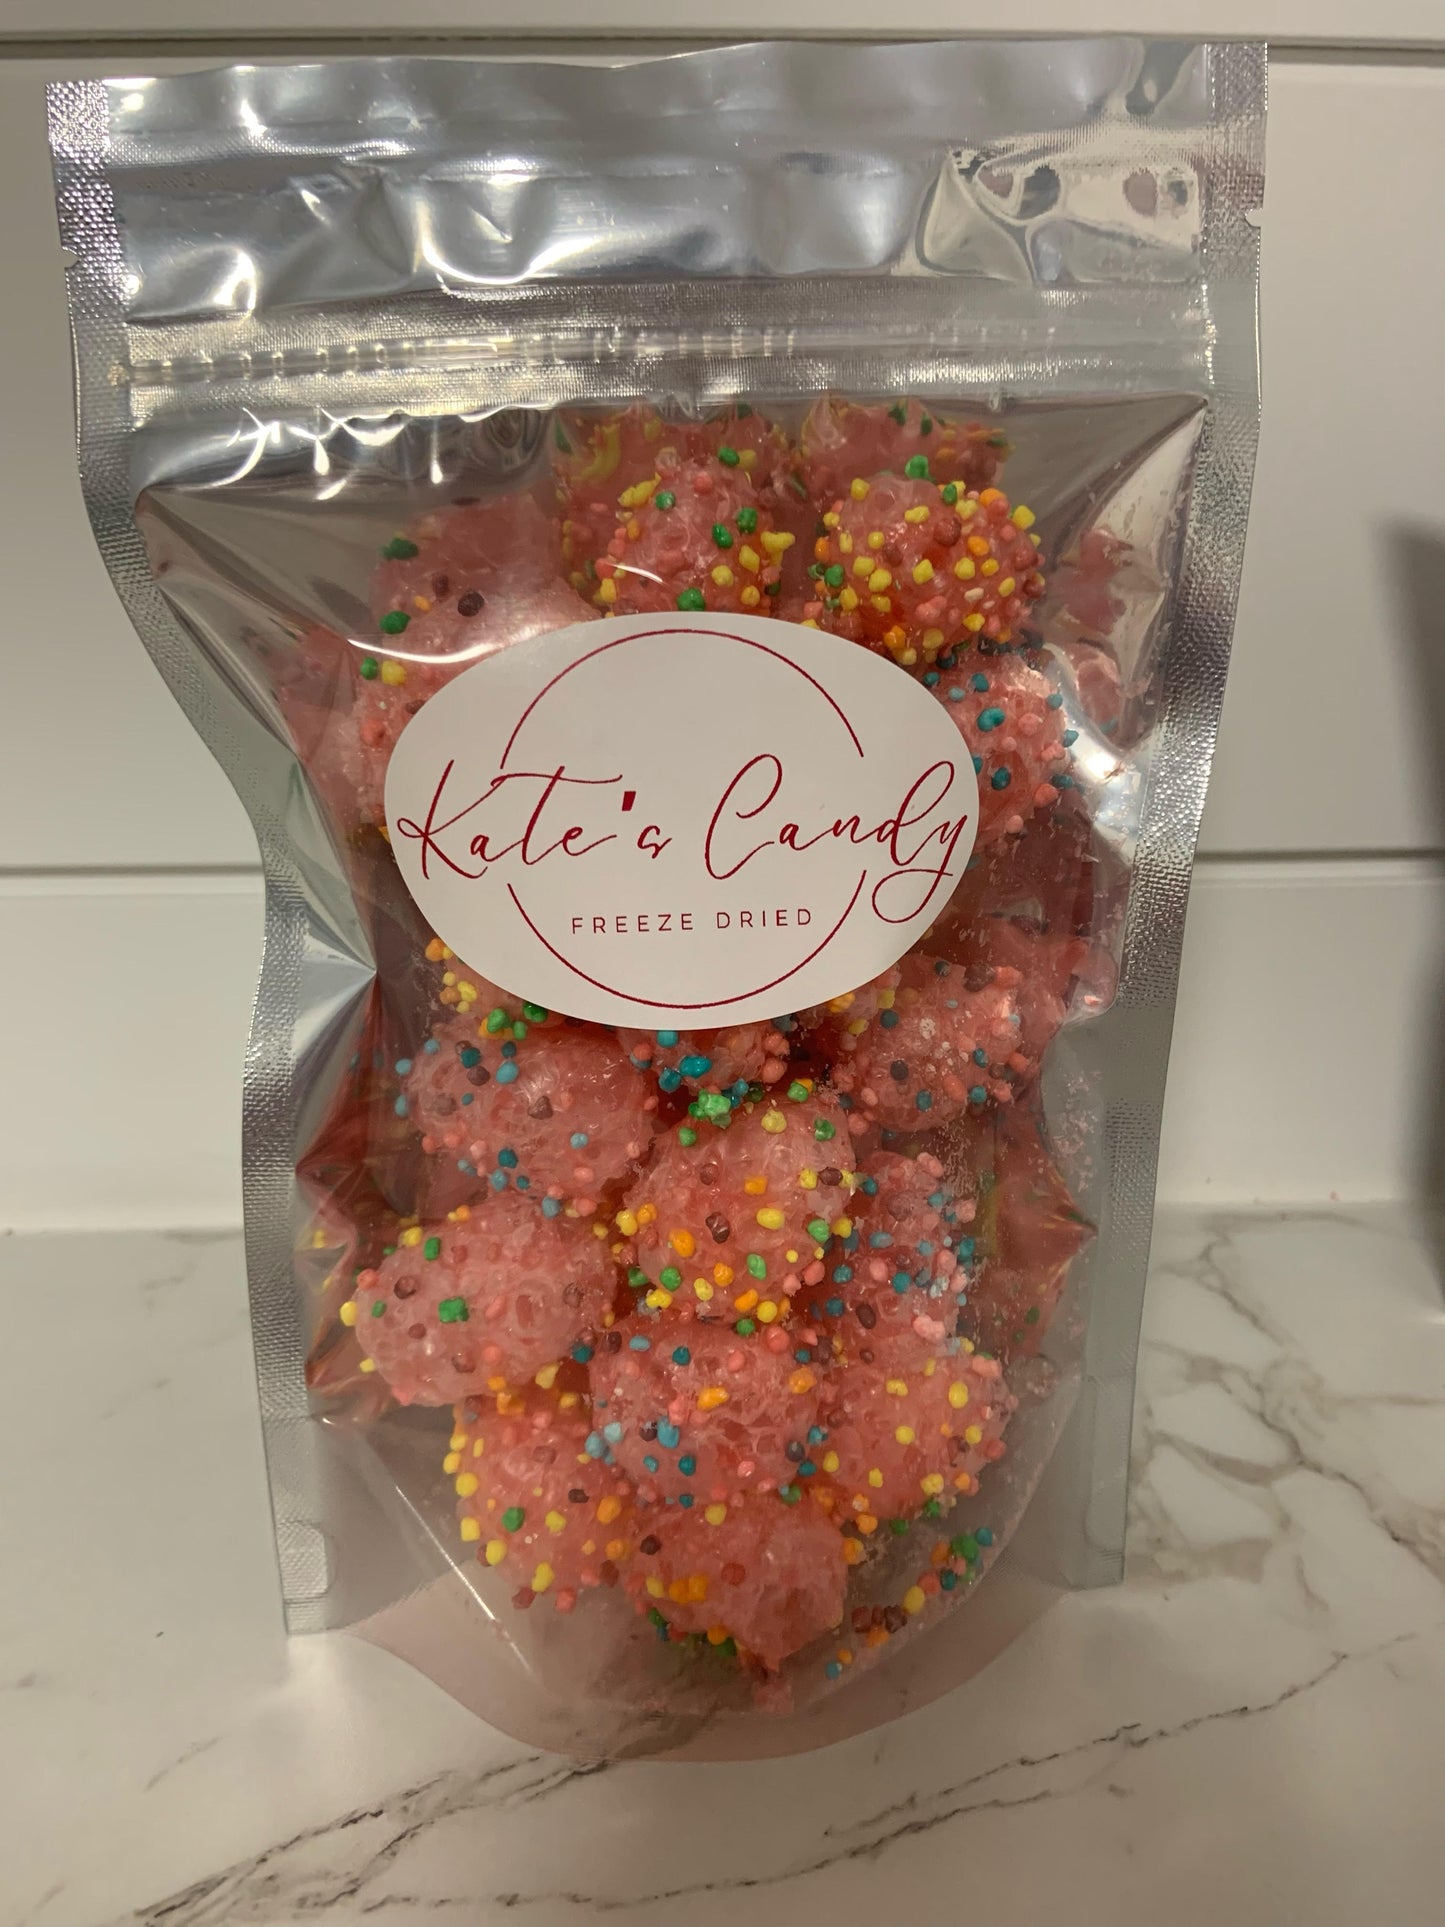 Freeze Dried Nerds Clusters